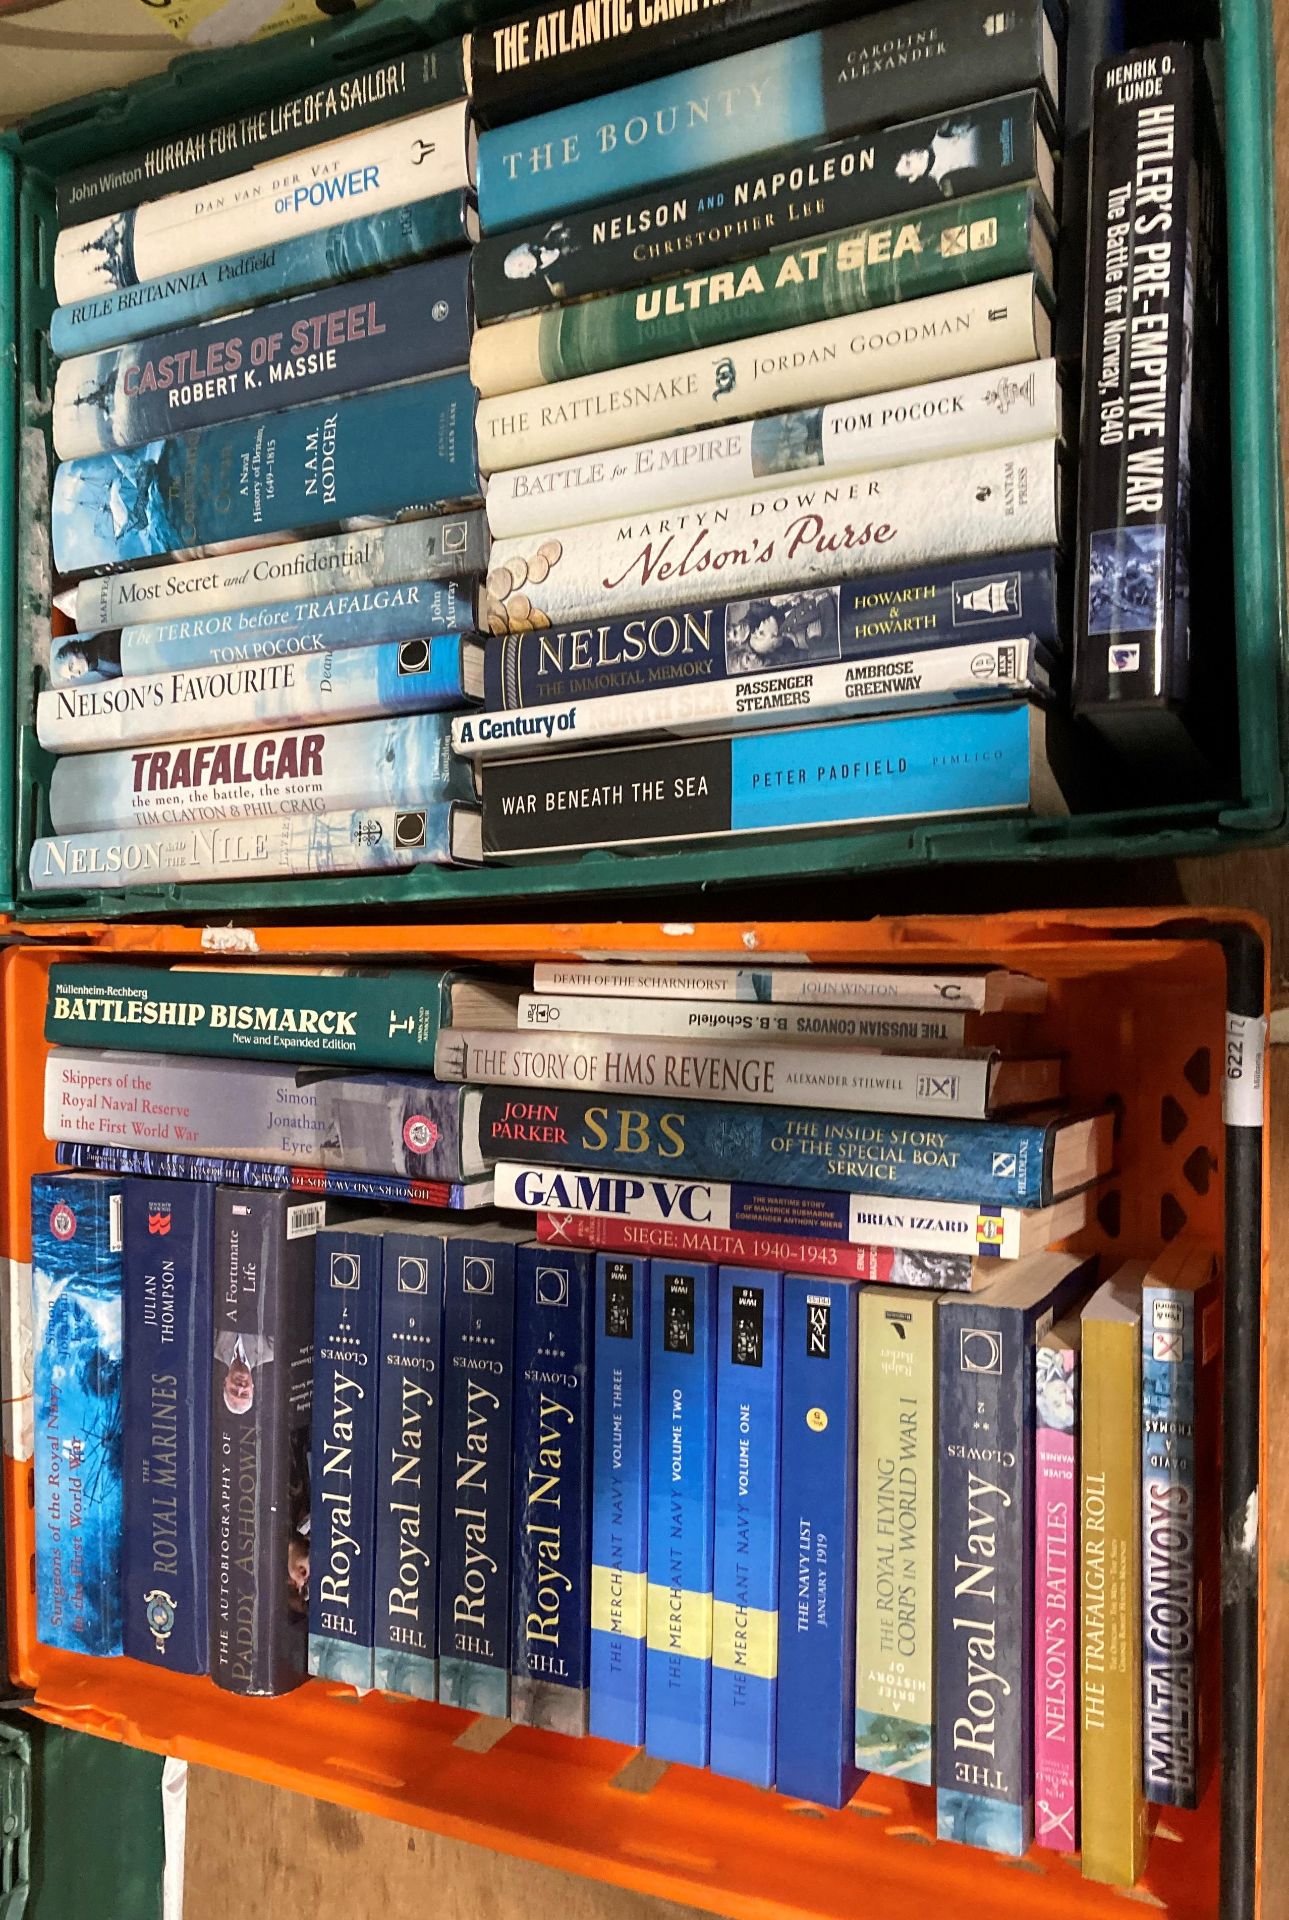 Contents to orange and green plastic crates - 47 books mainly maritime and naval related including